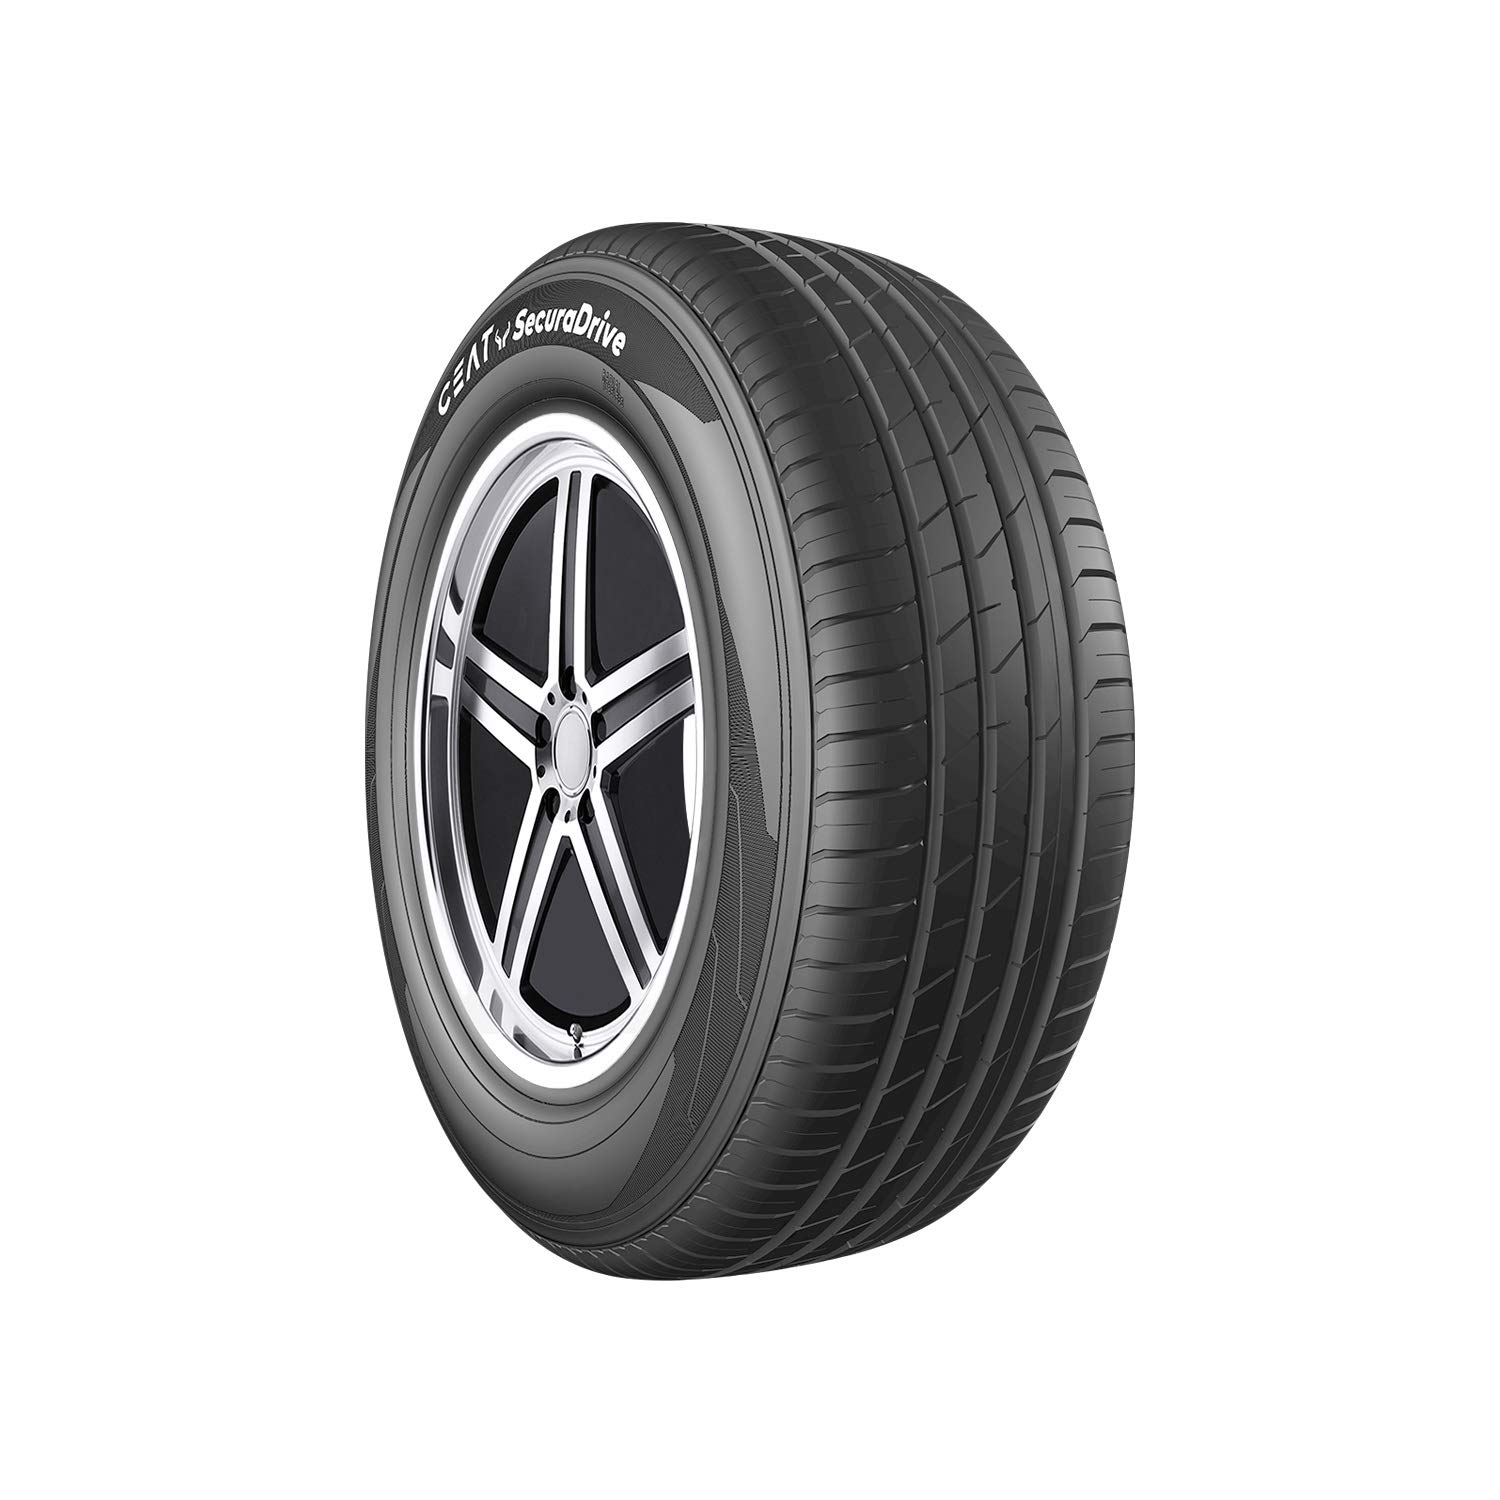 Ceat Secura Drive 185/65 R15 88H Tubeless Car Tyre (SET OF 4 TYRES)